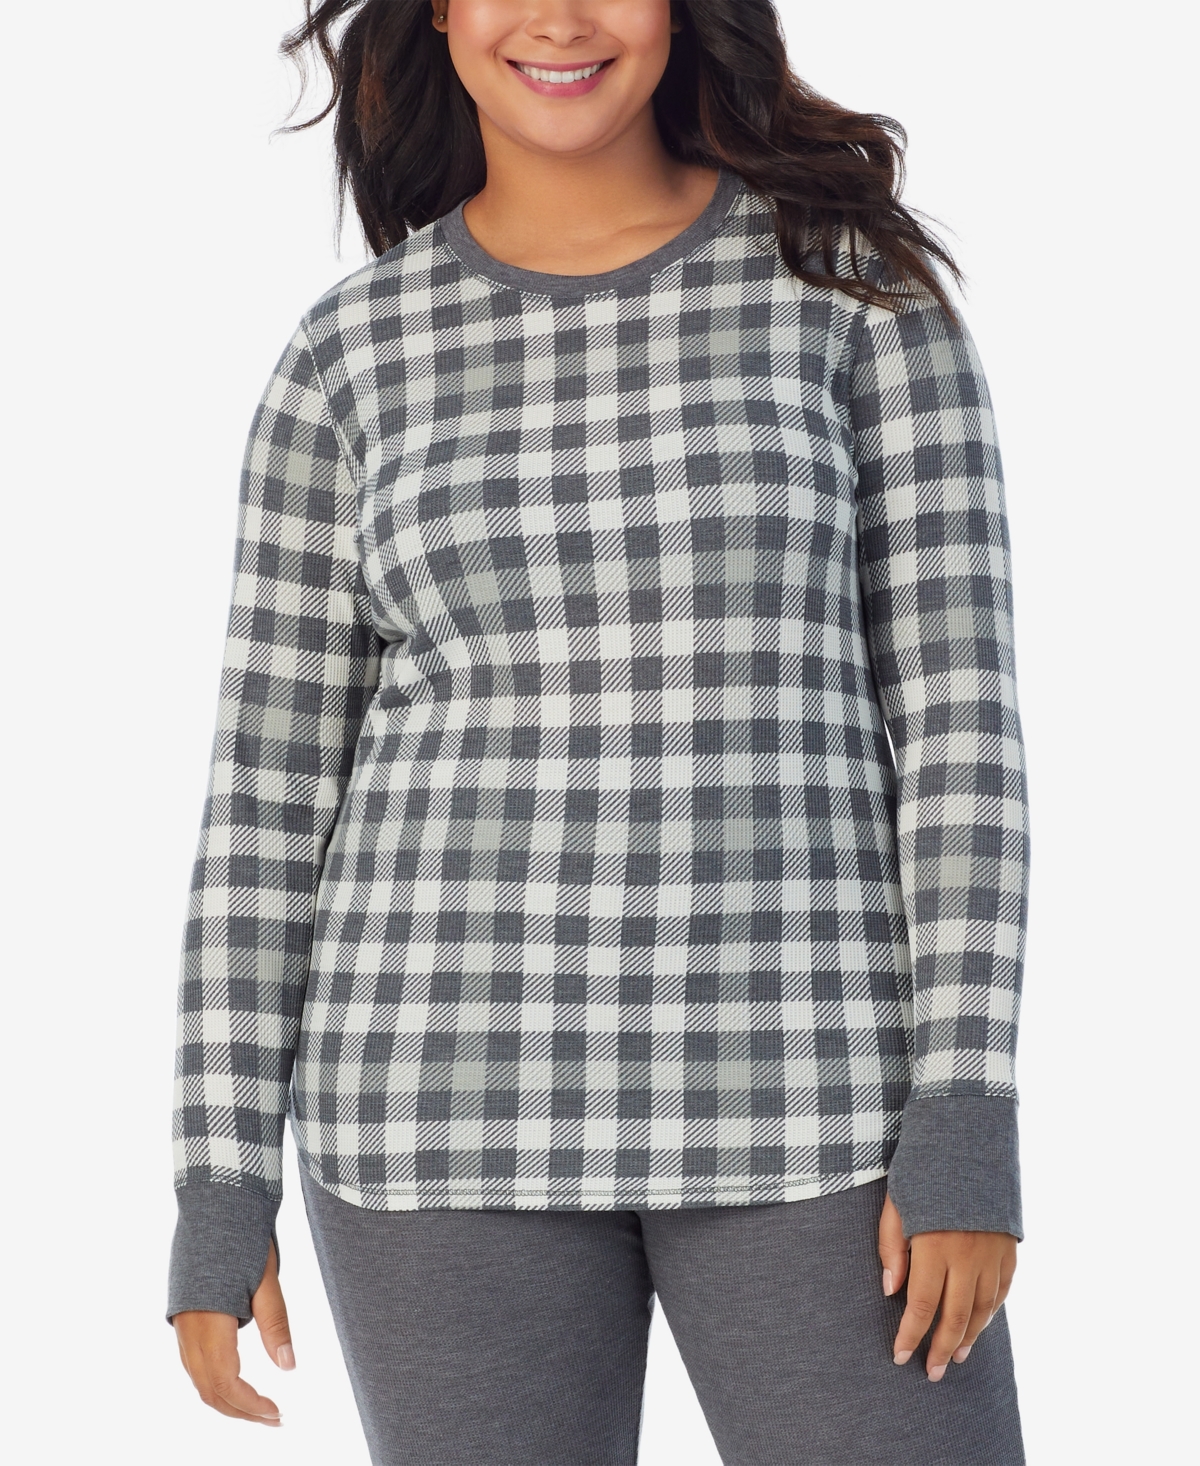 Plus Size Stretch Thermal Long-Sleeve Top - Grey Buffalo